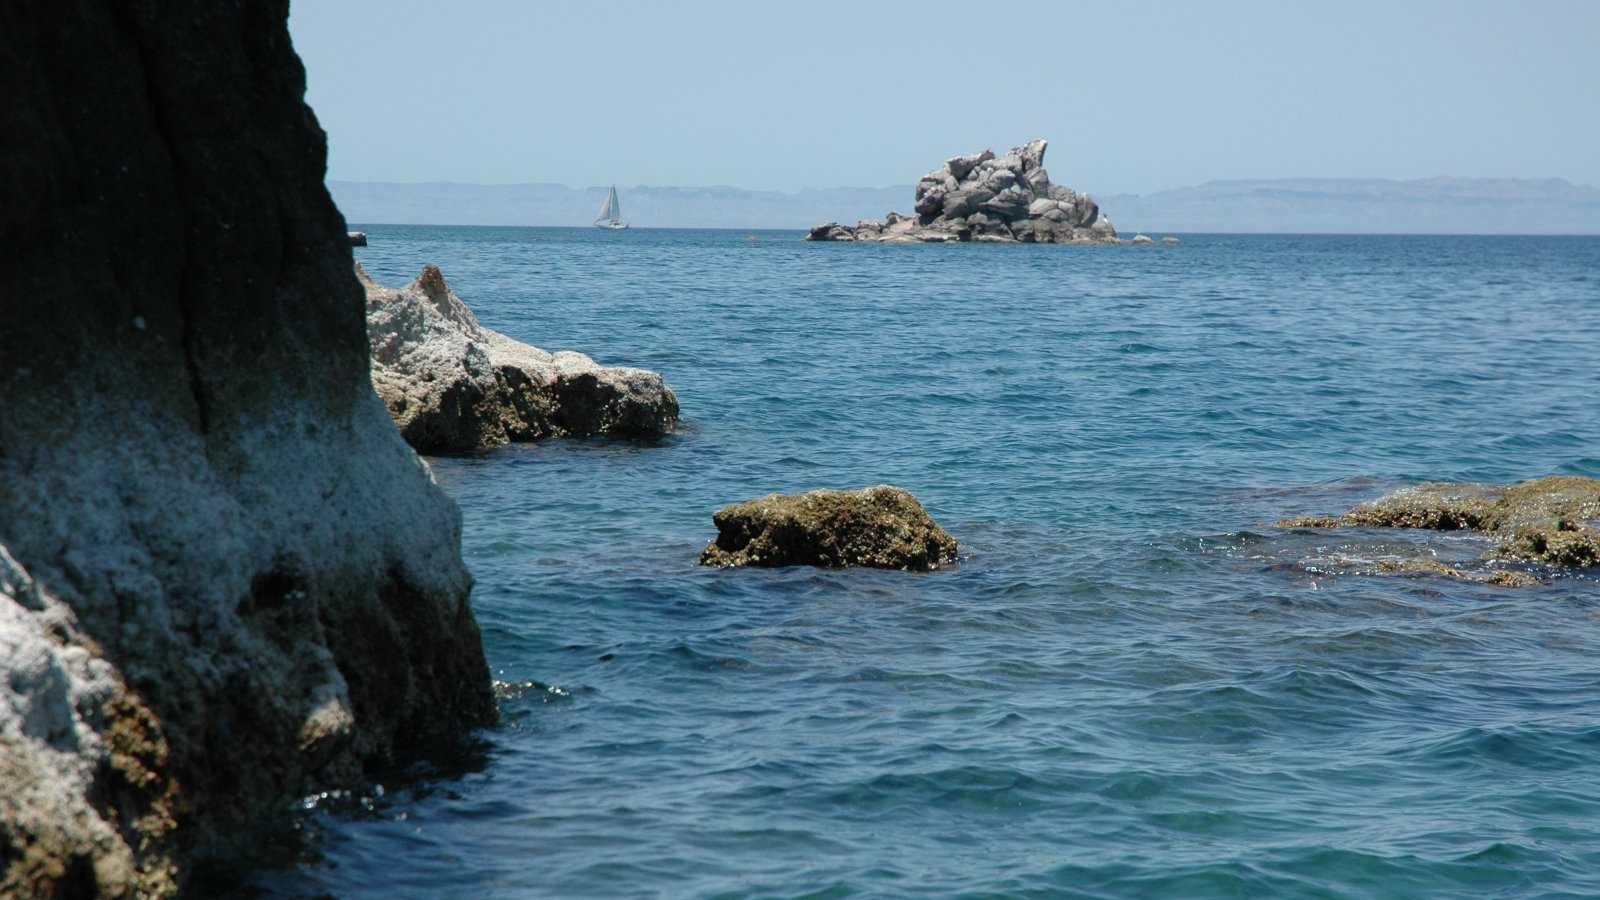 A sailing boat in the far distance with rocks and clear blue water in the foreground.